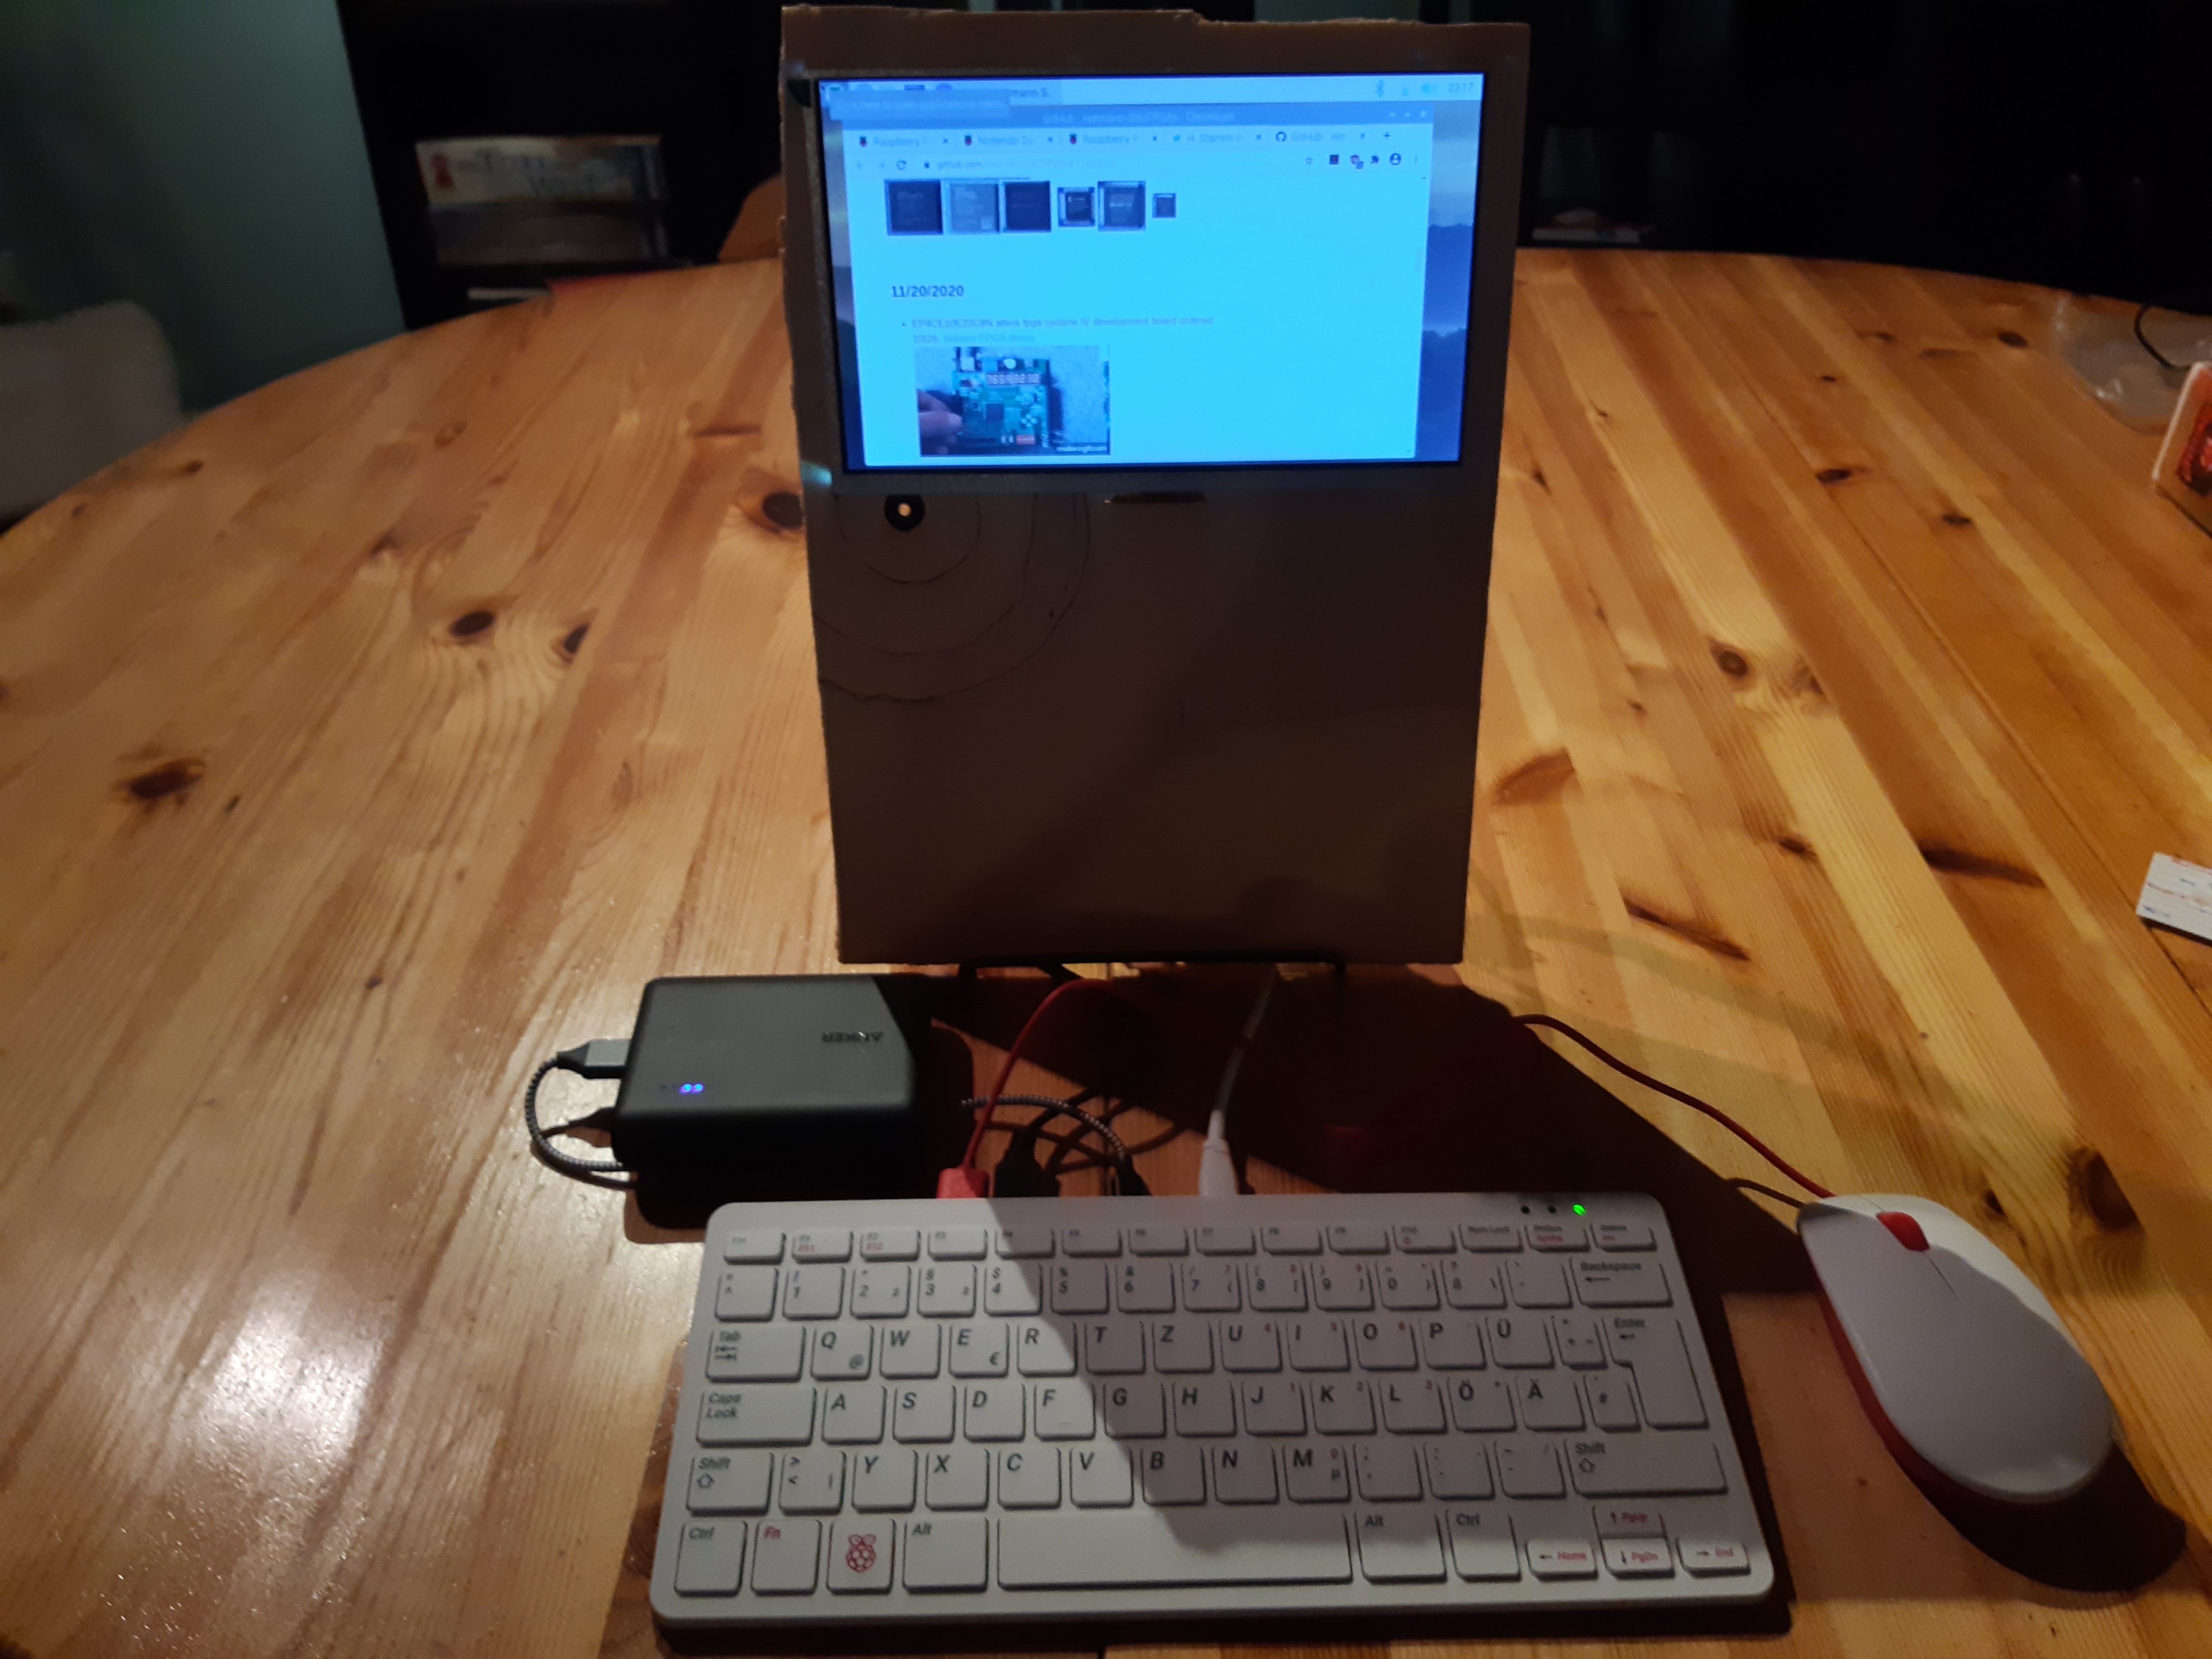 Turn Your Pi 400 Into a 13.3″ Raspberry Pi Laptop With The PiDock